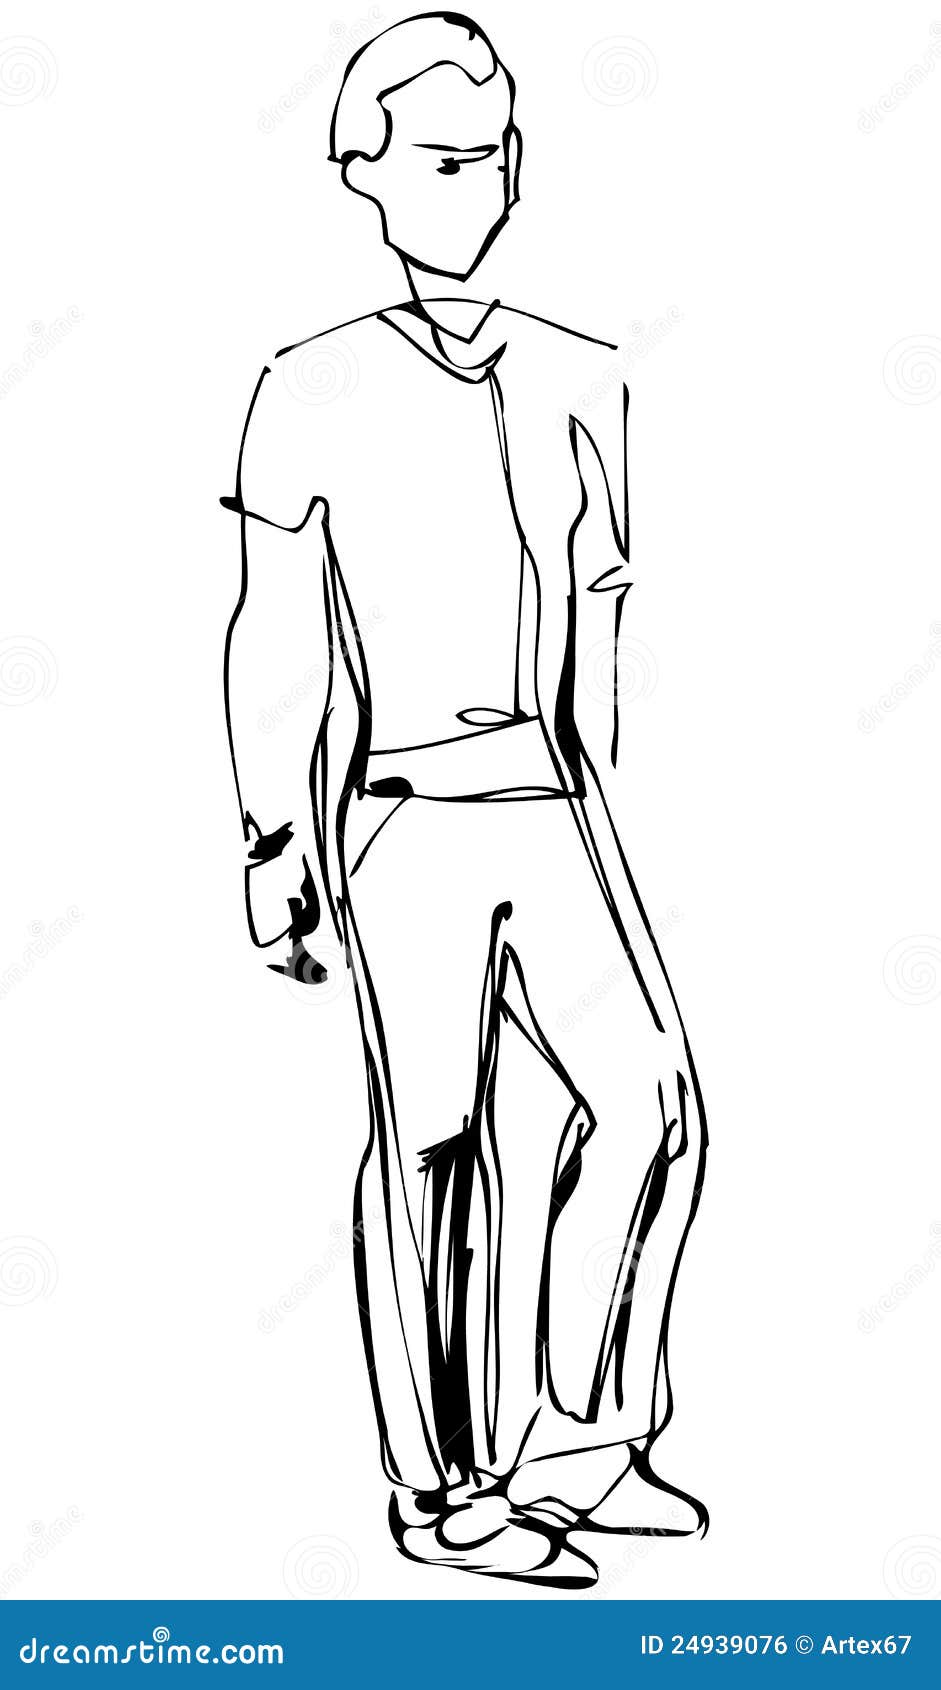 Sketch Of Standing Fellow Full Length Royalty Free Stock Image - Image